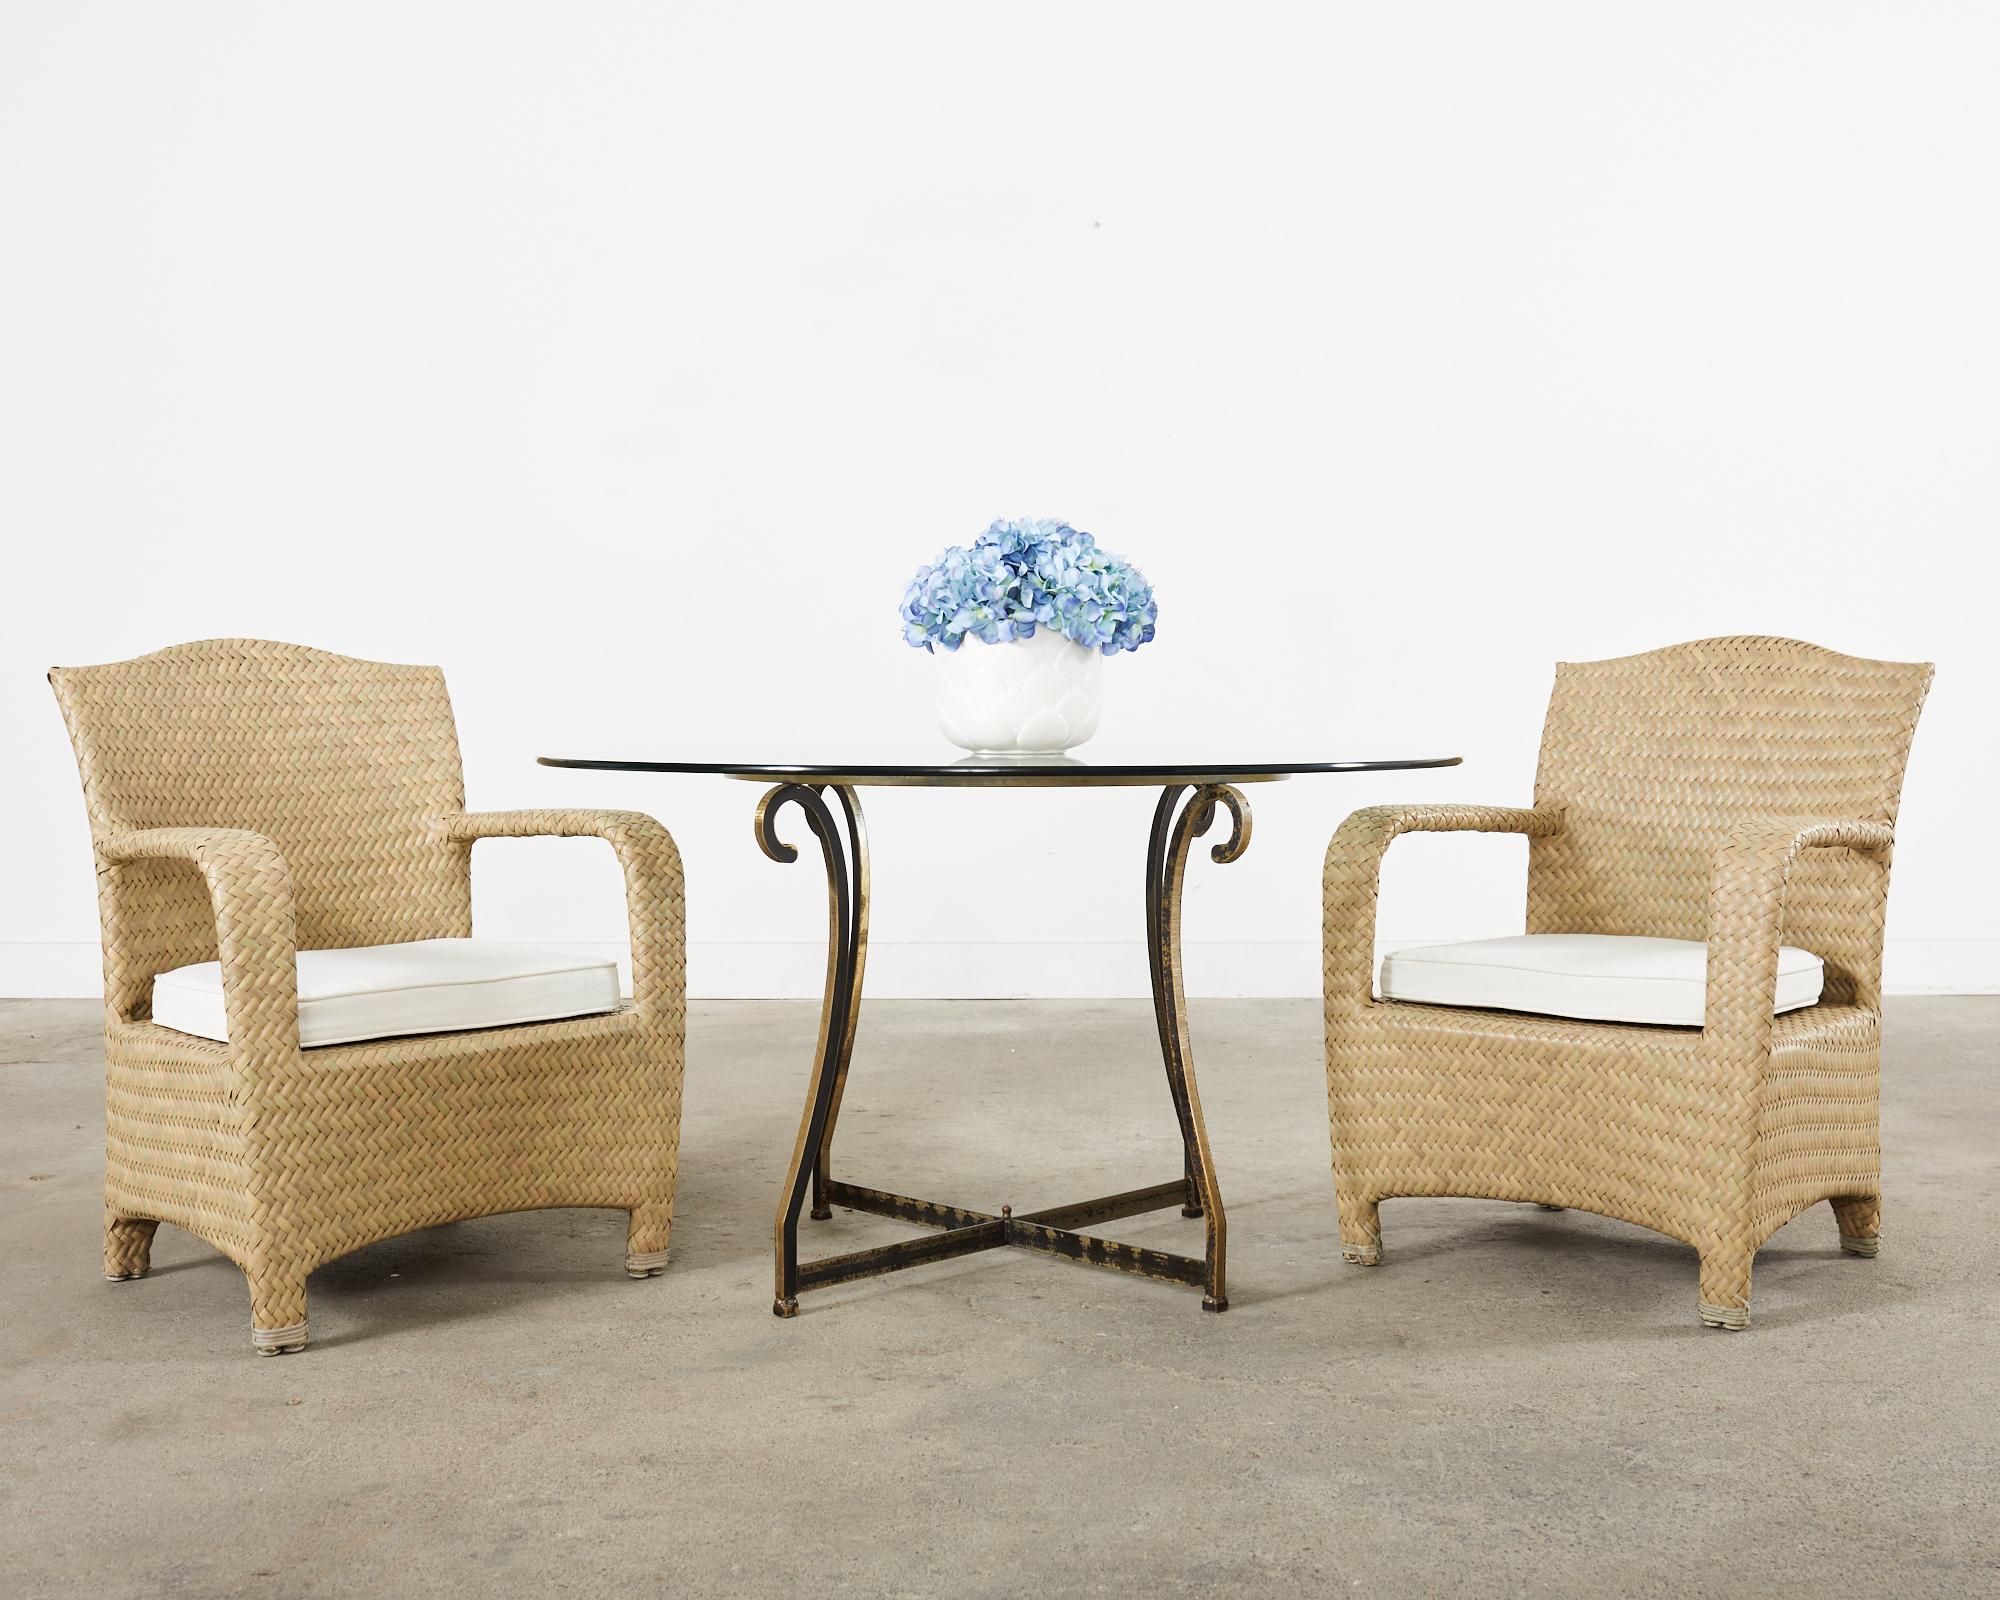 Rare set of eight large patio and garden dining armchairs from the Havana Collection by Brown Jordan. The set features sturdy aluminum frames wrapped with woven resin wicker in stylish earth-toned shades. The chairs have a humped crest back